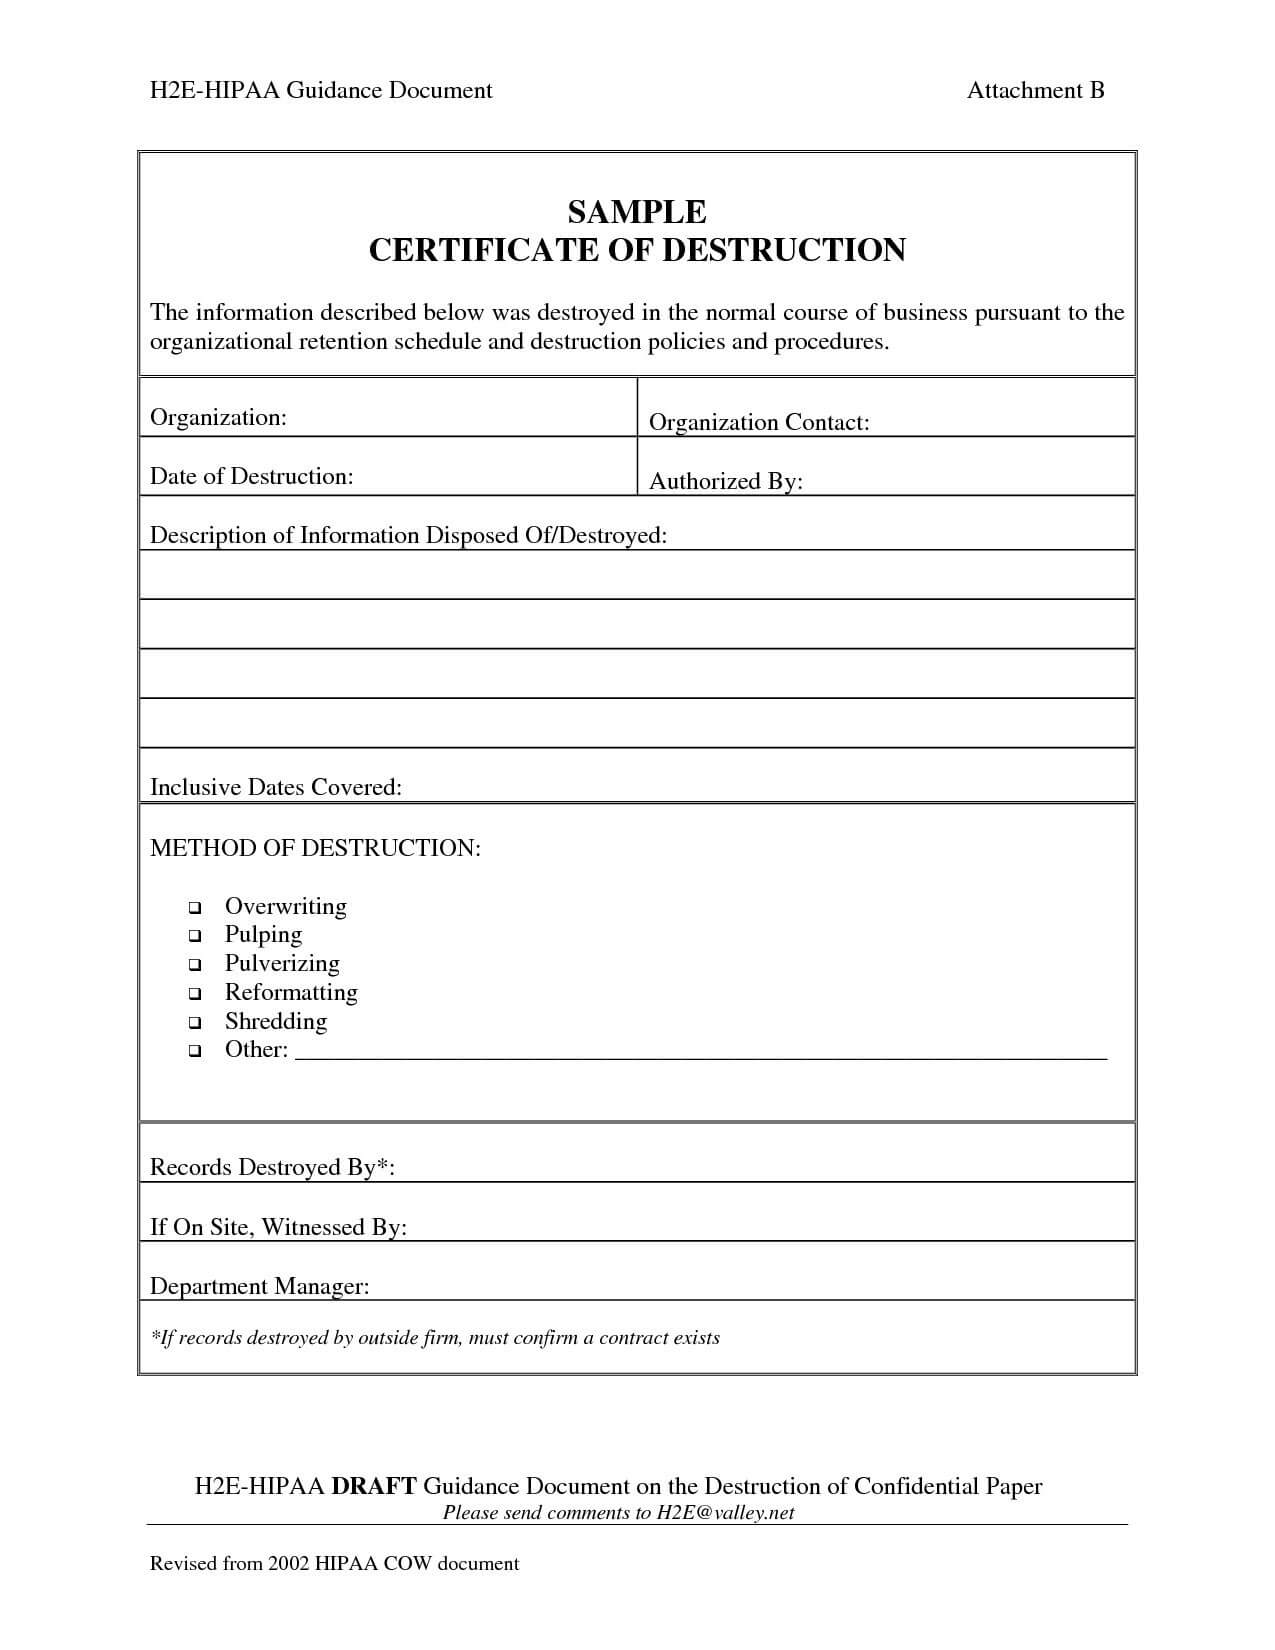 Exceptional Certificate Of Destruction Template Ideas Within Certificate Of Disposal Template